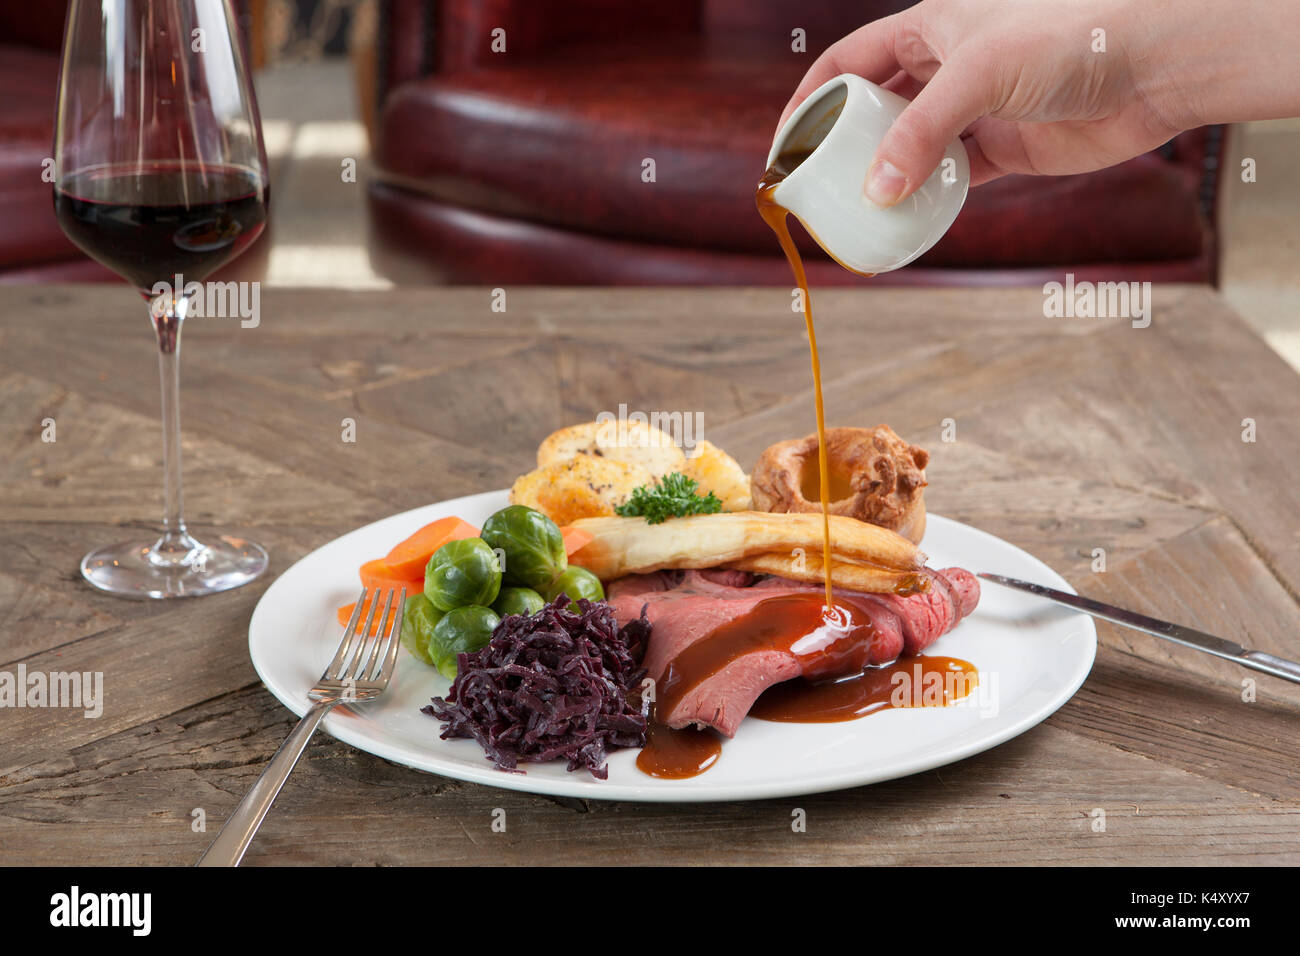 Roast beef dinner with gravy on a plate on a wooden table Stock Photo